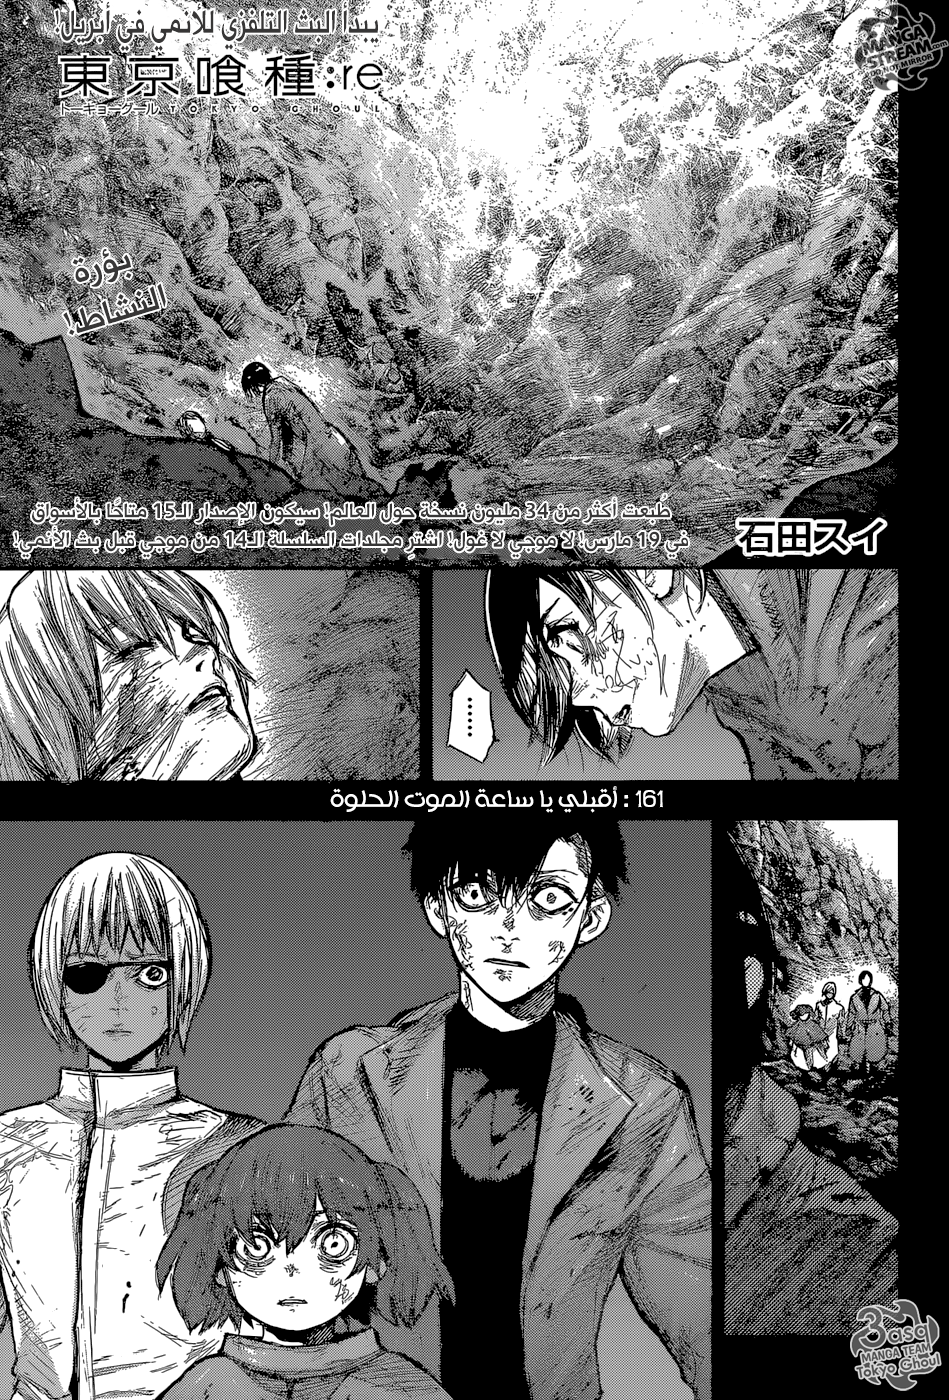 Tokyo Ghoul: Re: Chapter 161 - Page 1